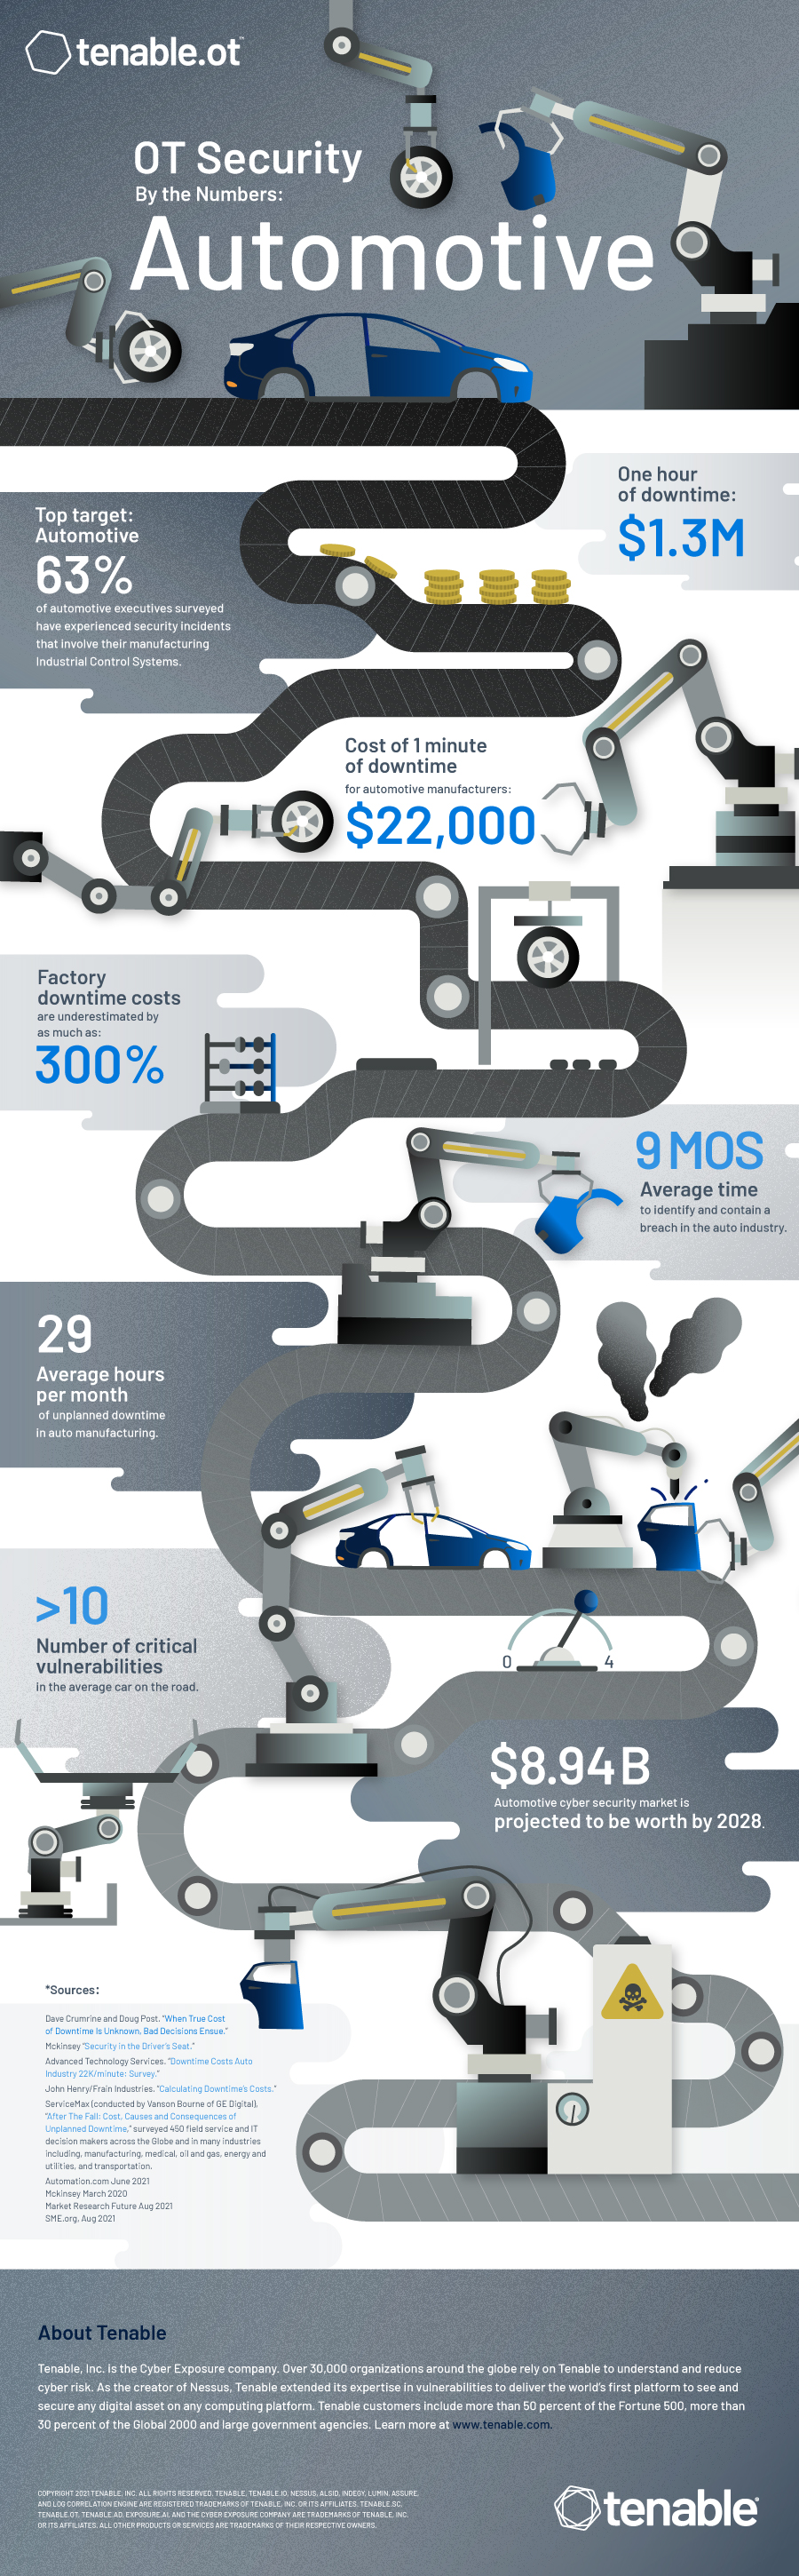 OT Security By The Numbers - Automotive